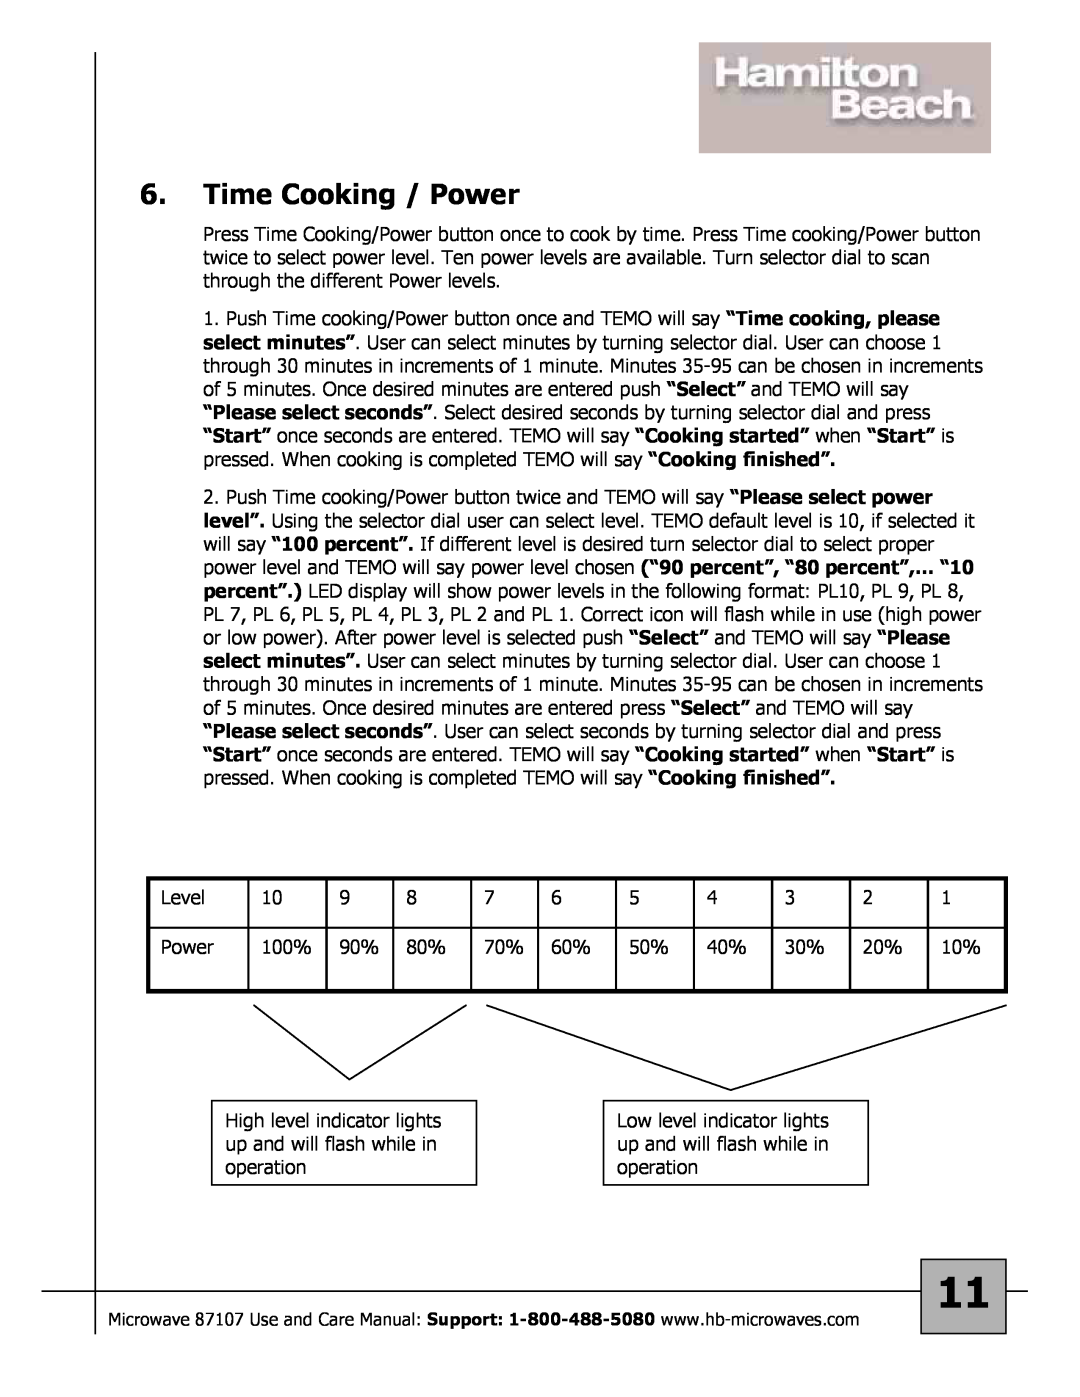 Hamilton Beach 87107 owner manual Time Cooking / Power 